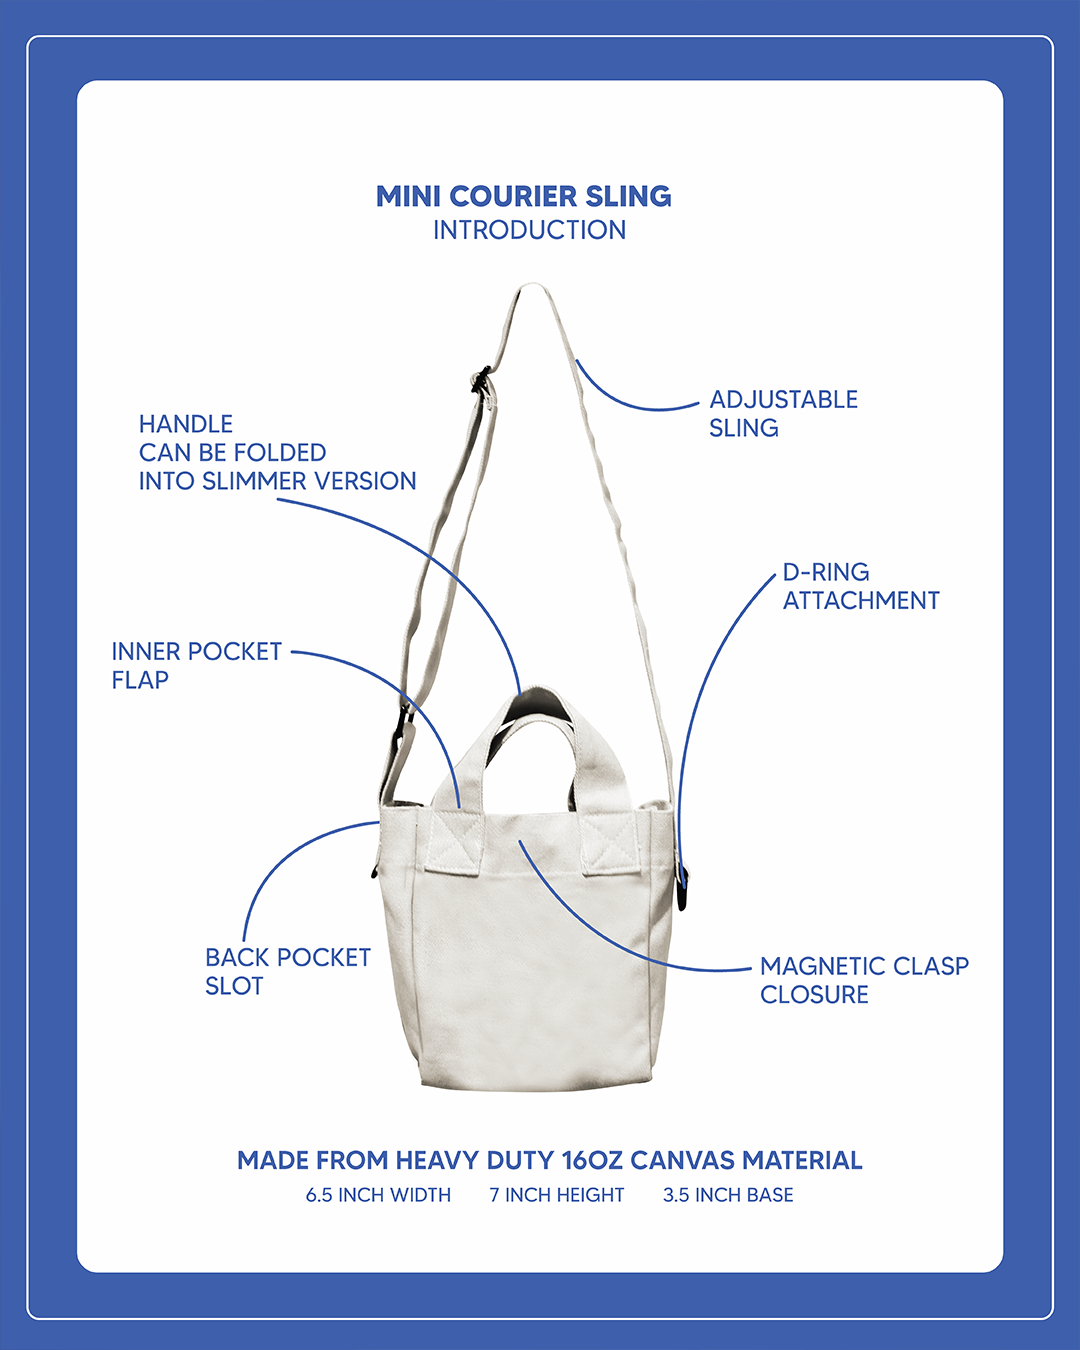 Mini Courier Sling - Wisteria